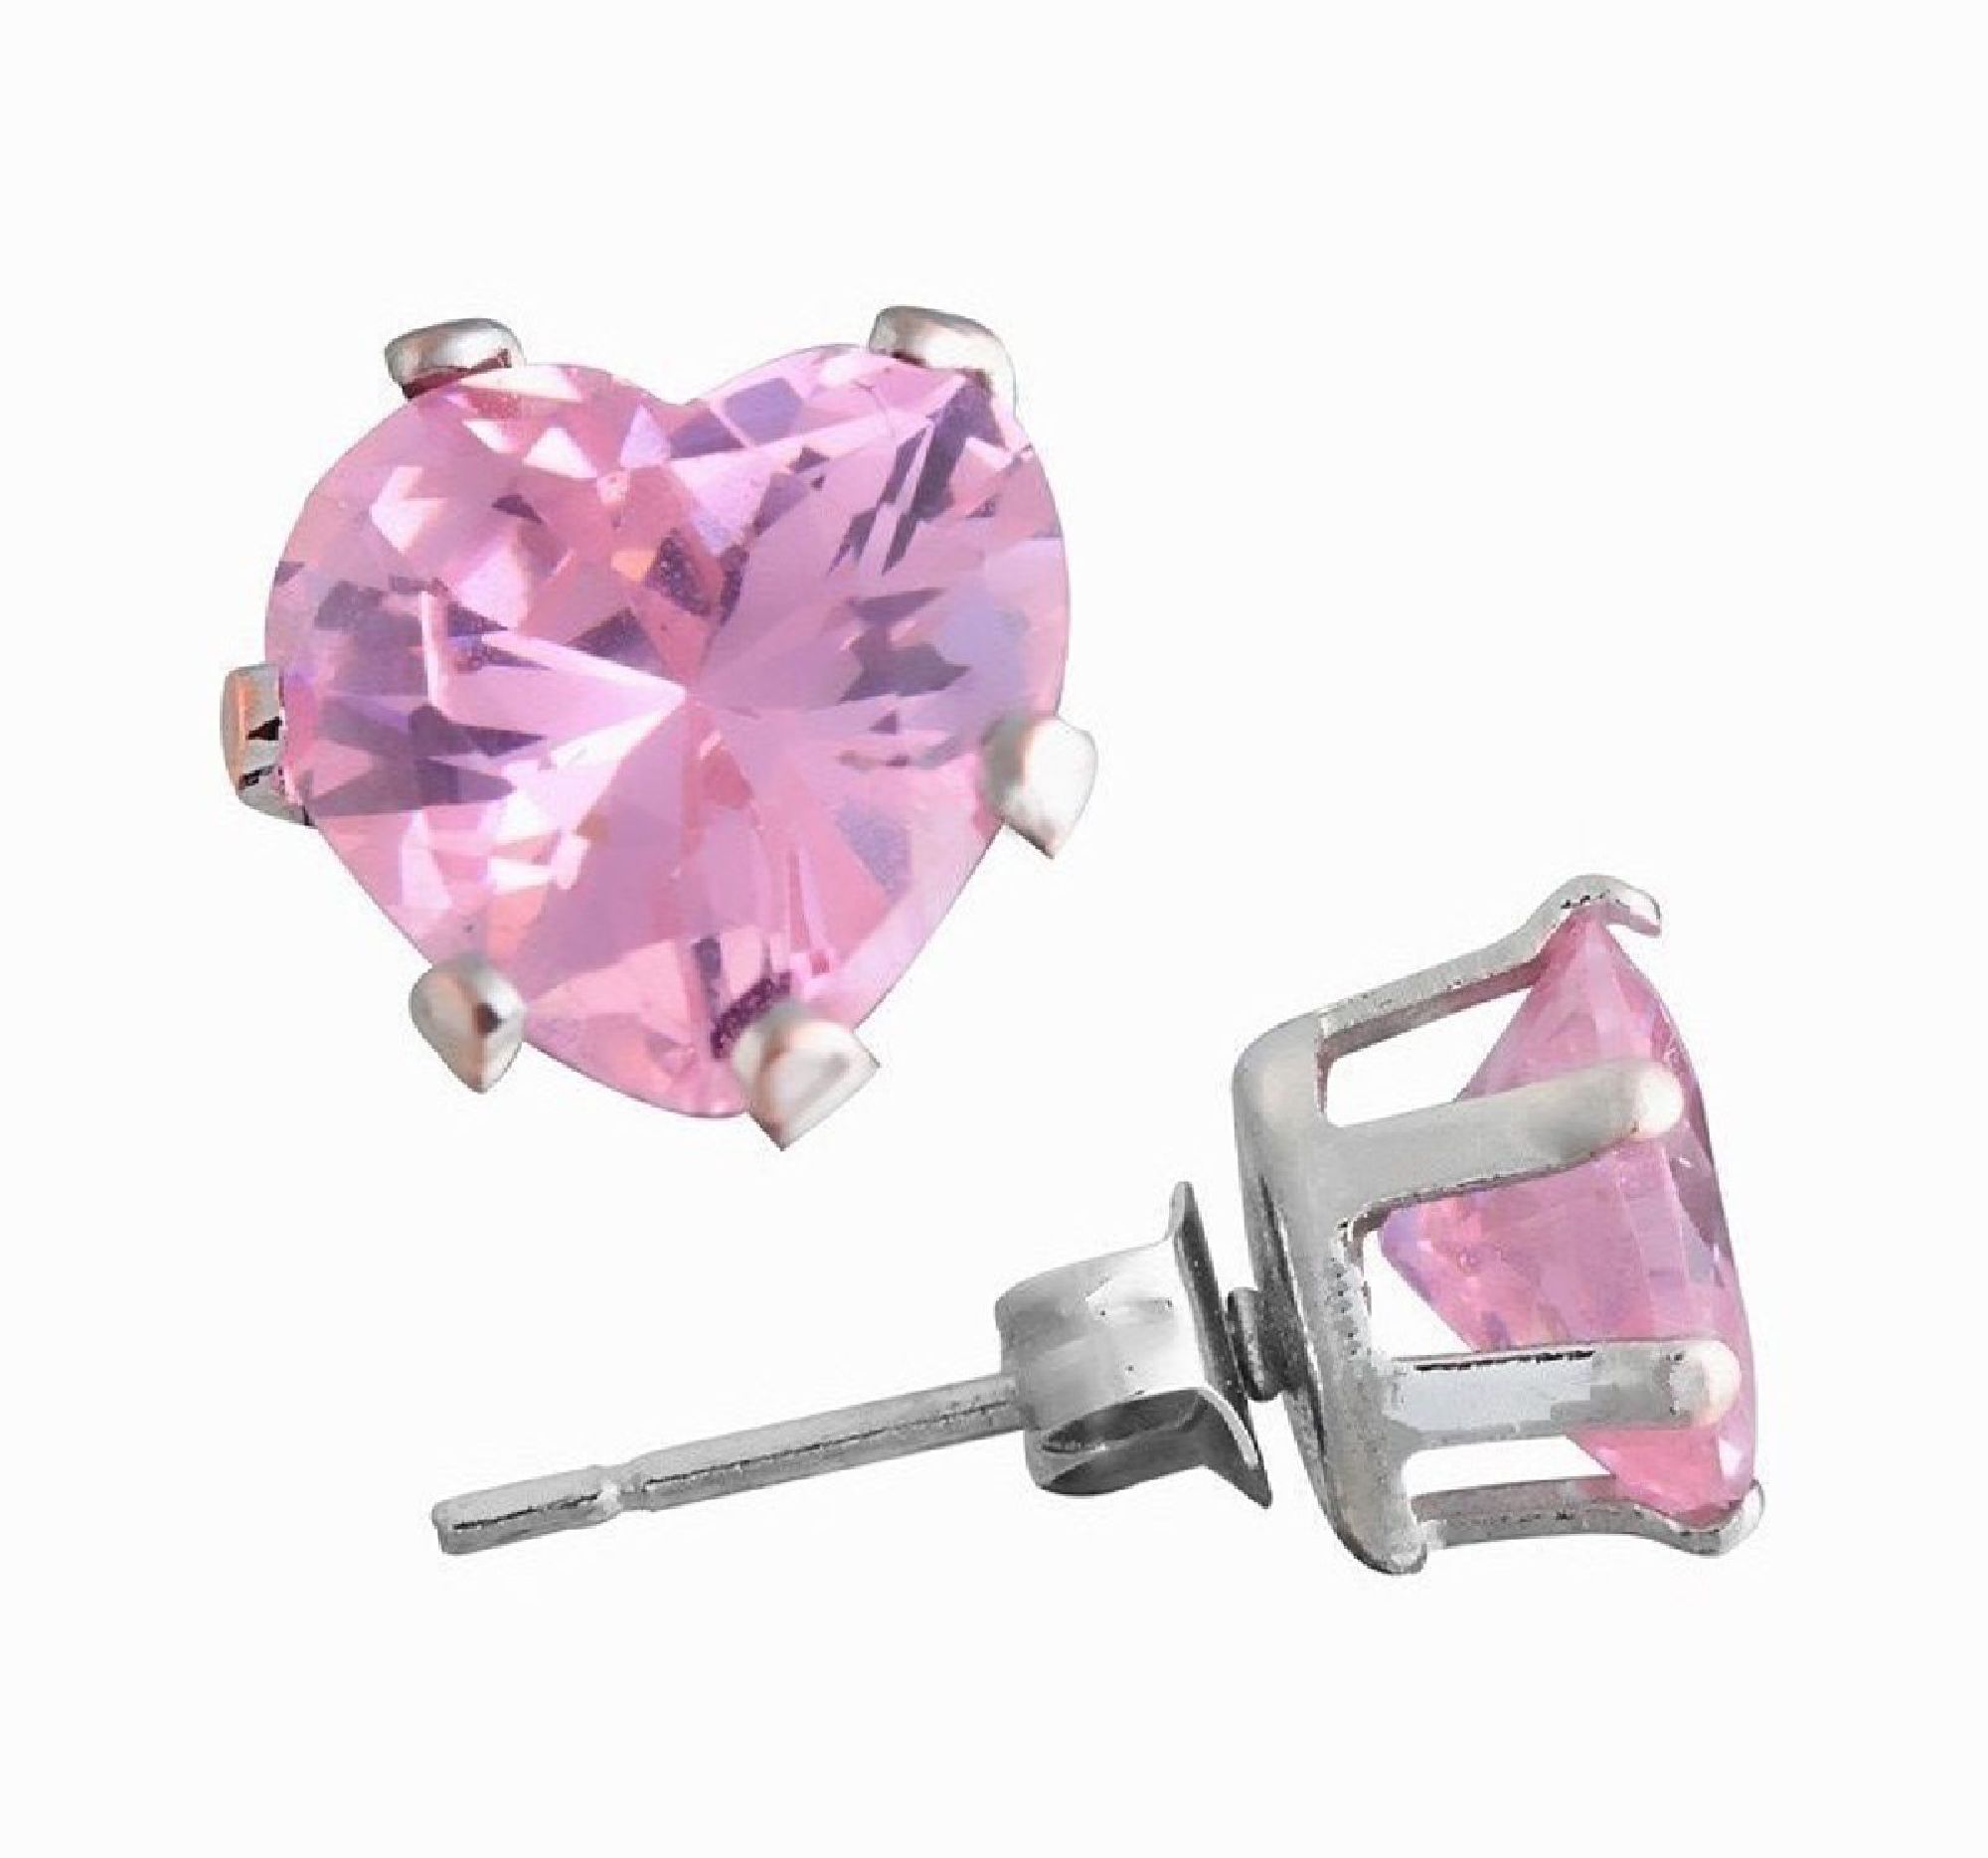 ParisJewelry.com 1 Carat Heart Shape Pink Diamond manmade Stud Earrings for Woman in 14k White Gold over Sterling Silver Designed in France